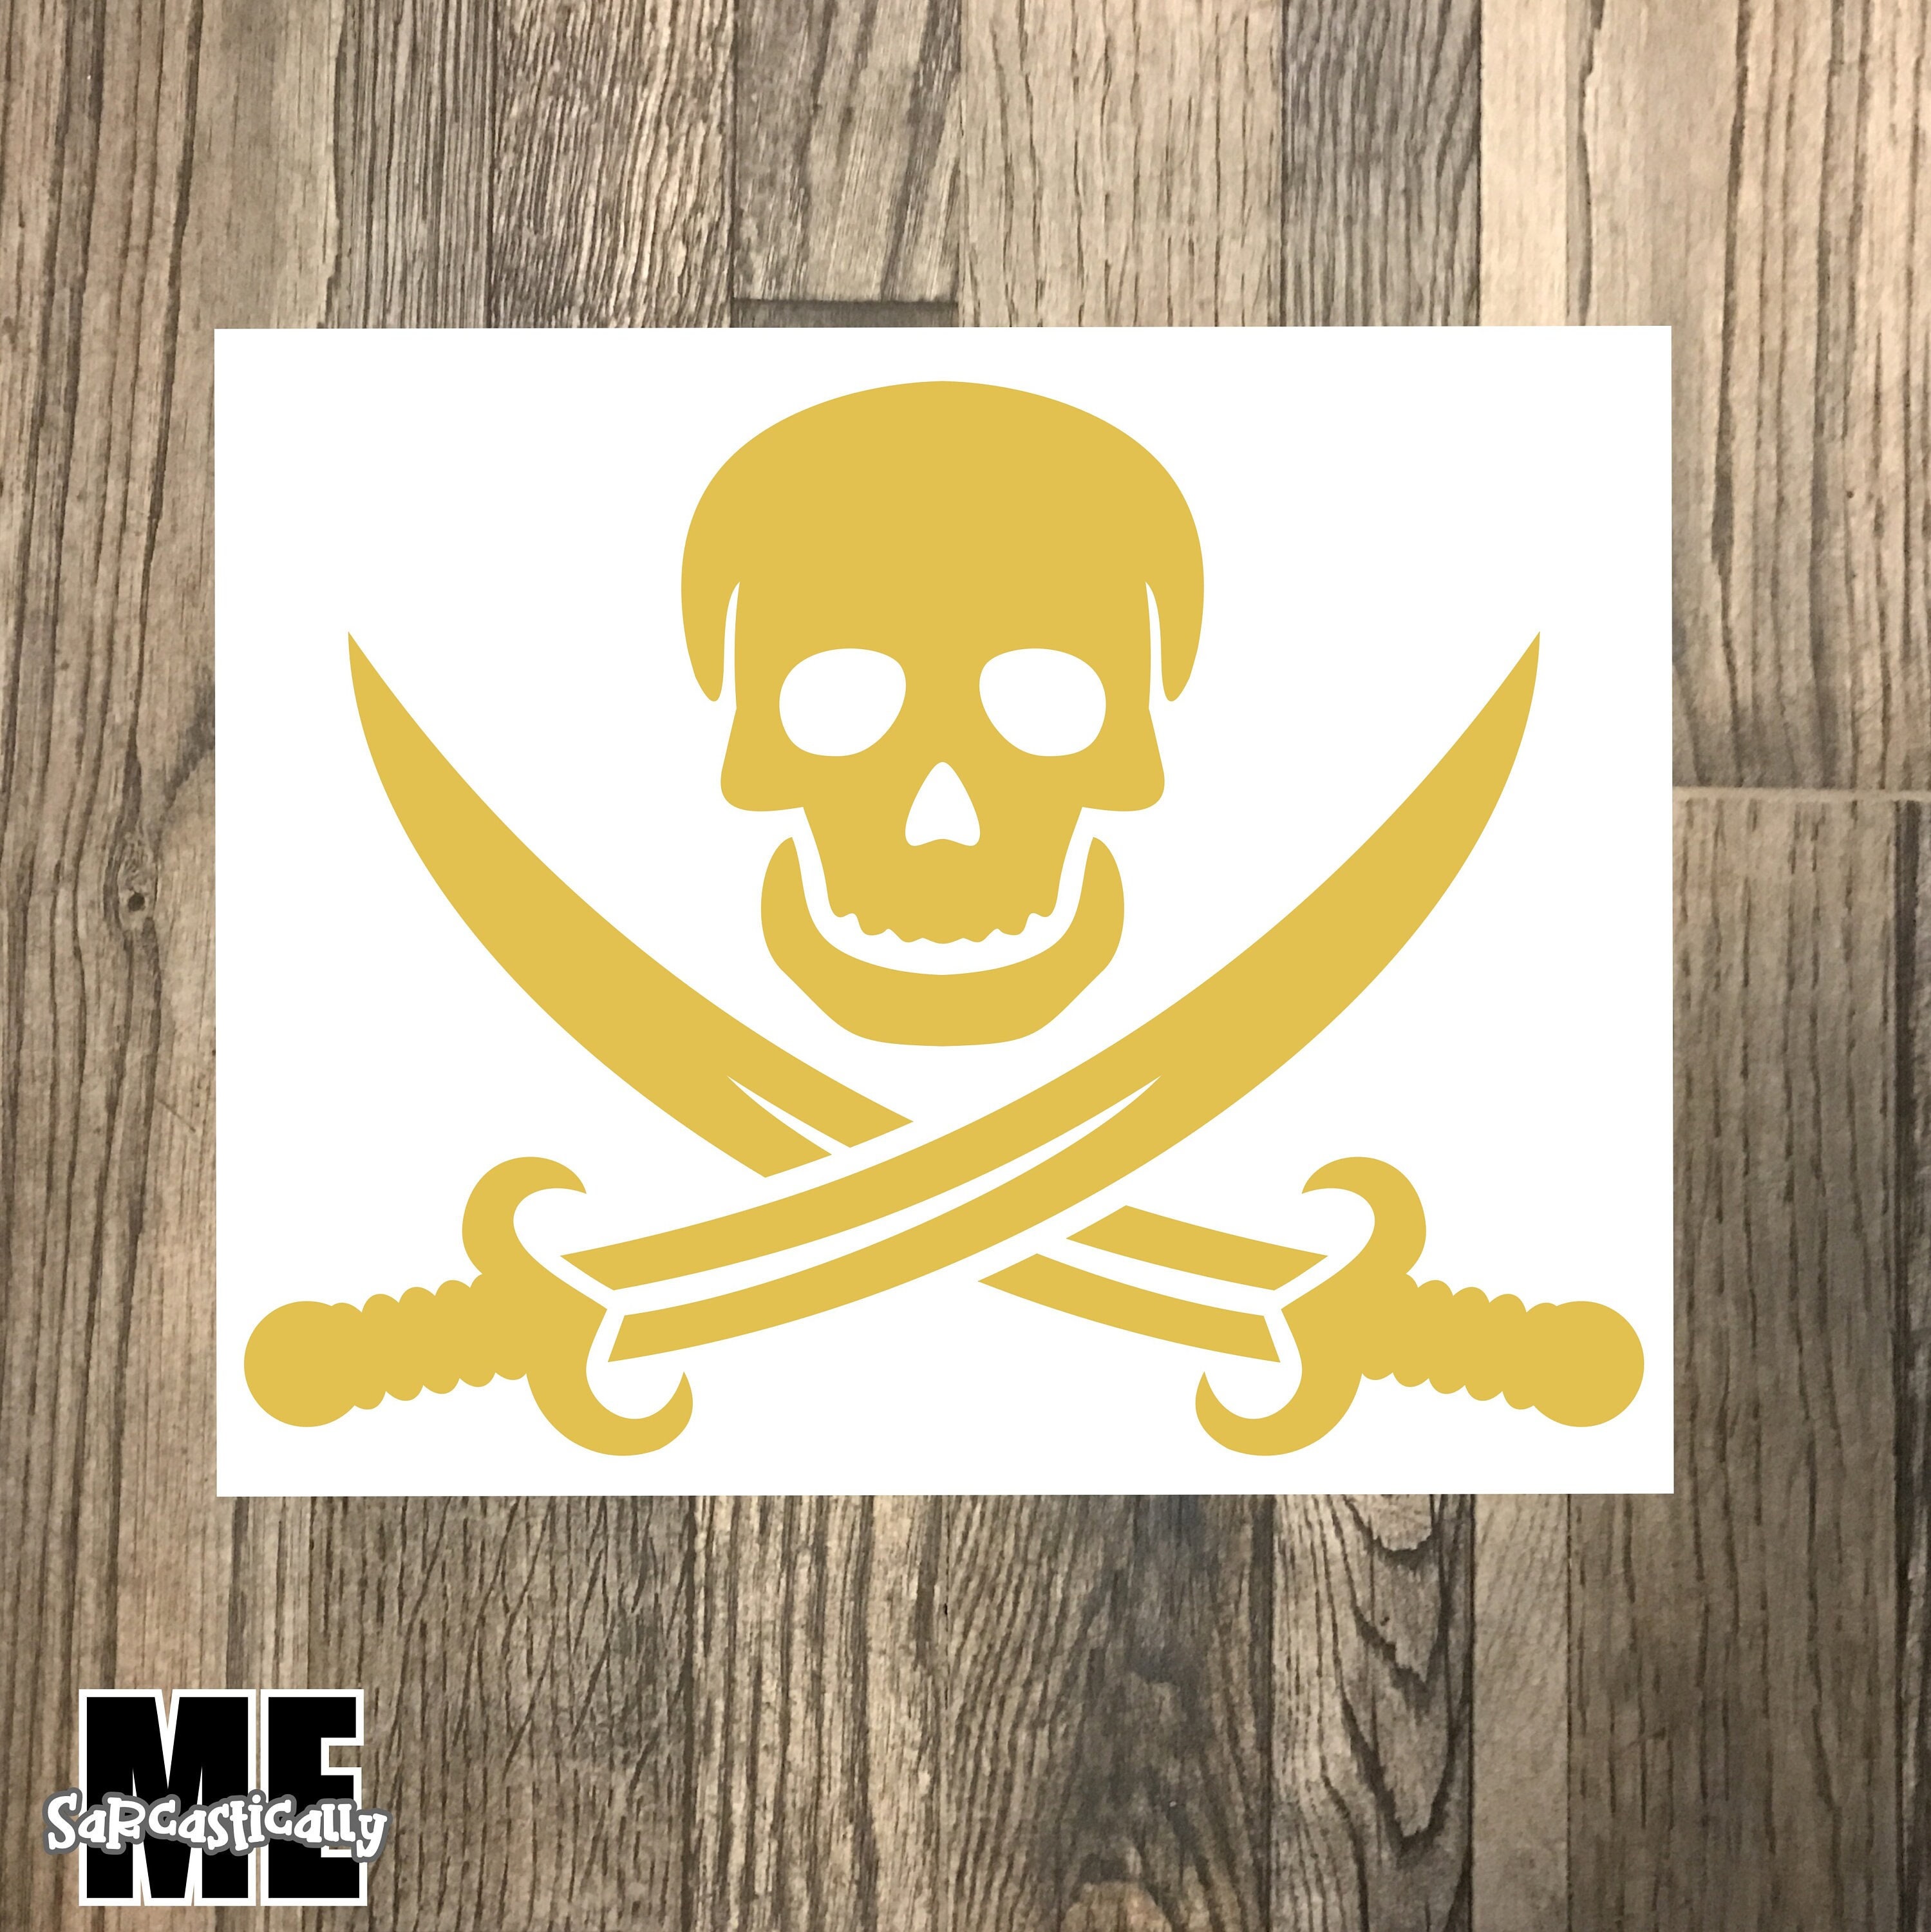 50PCS Pirate Stickers,Jolly Roger Stickers Decals for Pirate Party,Skull  and Crossbones Stickers for Water